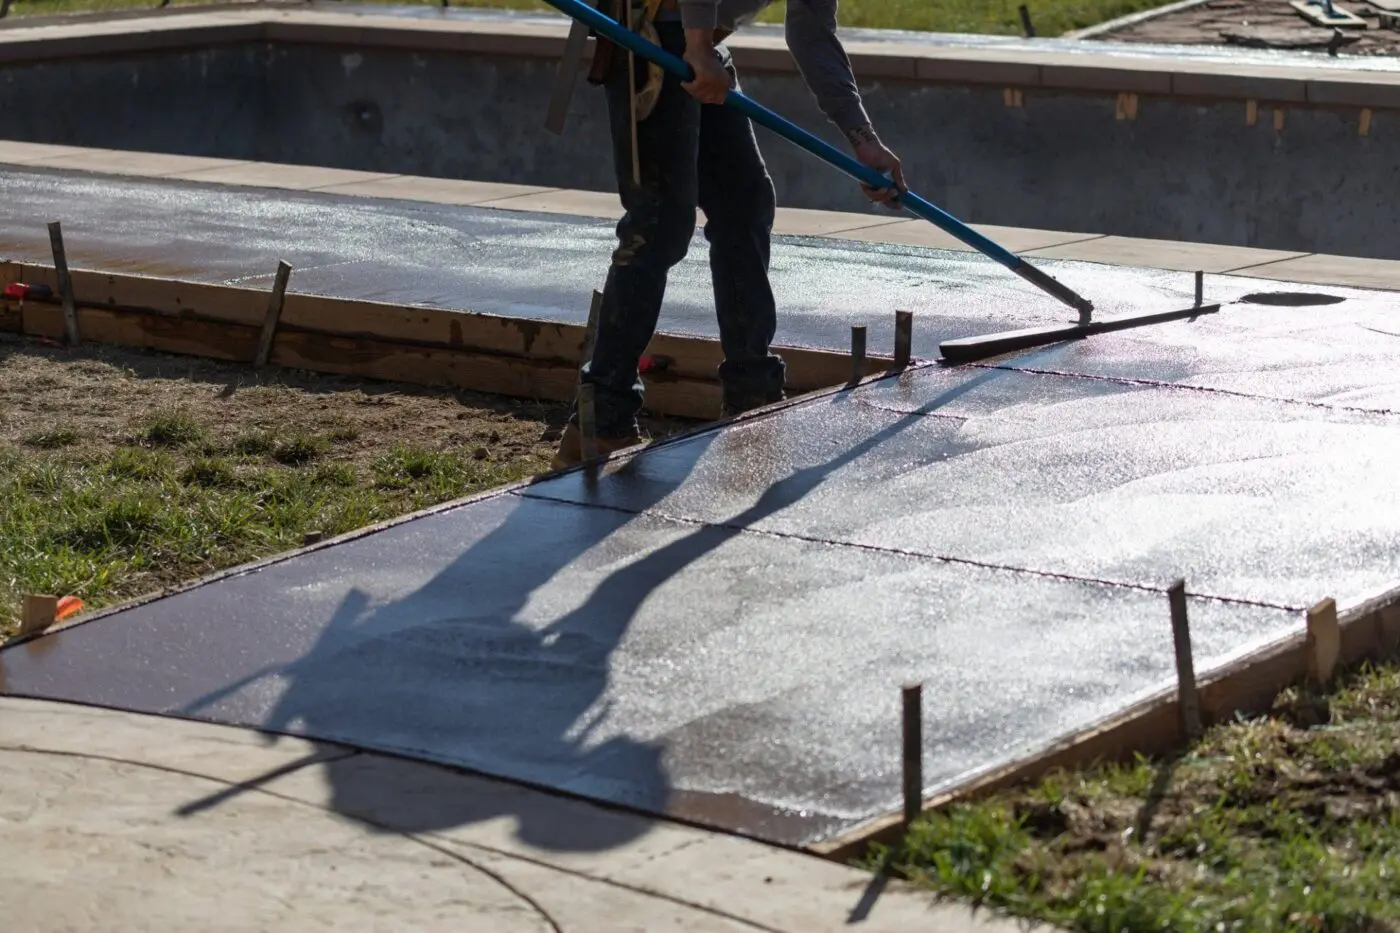 A construction worker employed by concrete contractors in Hialeah, FL, uses a long-handled tool to smooth freshly poured concrete on a walkway. The scene unfolds outdoors under bright sunlight, with shadows cast on the damp cement. Wood forms outline the area, and other construction materials are visible.